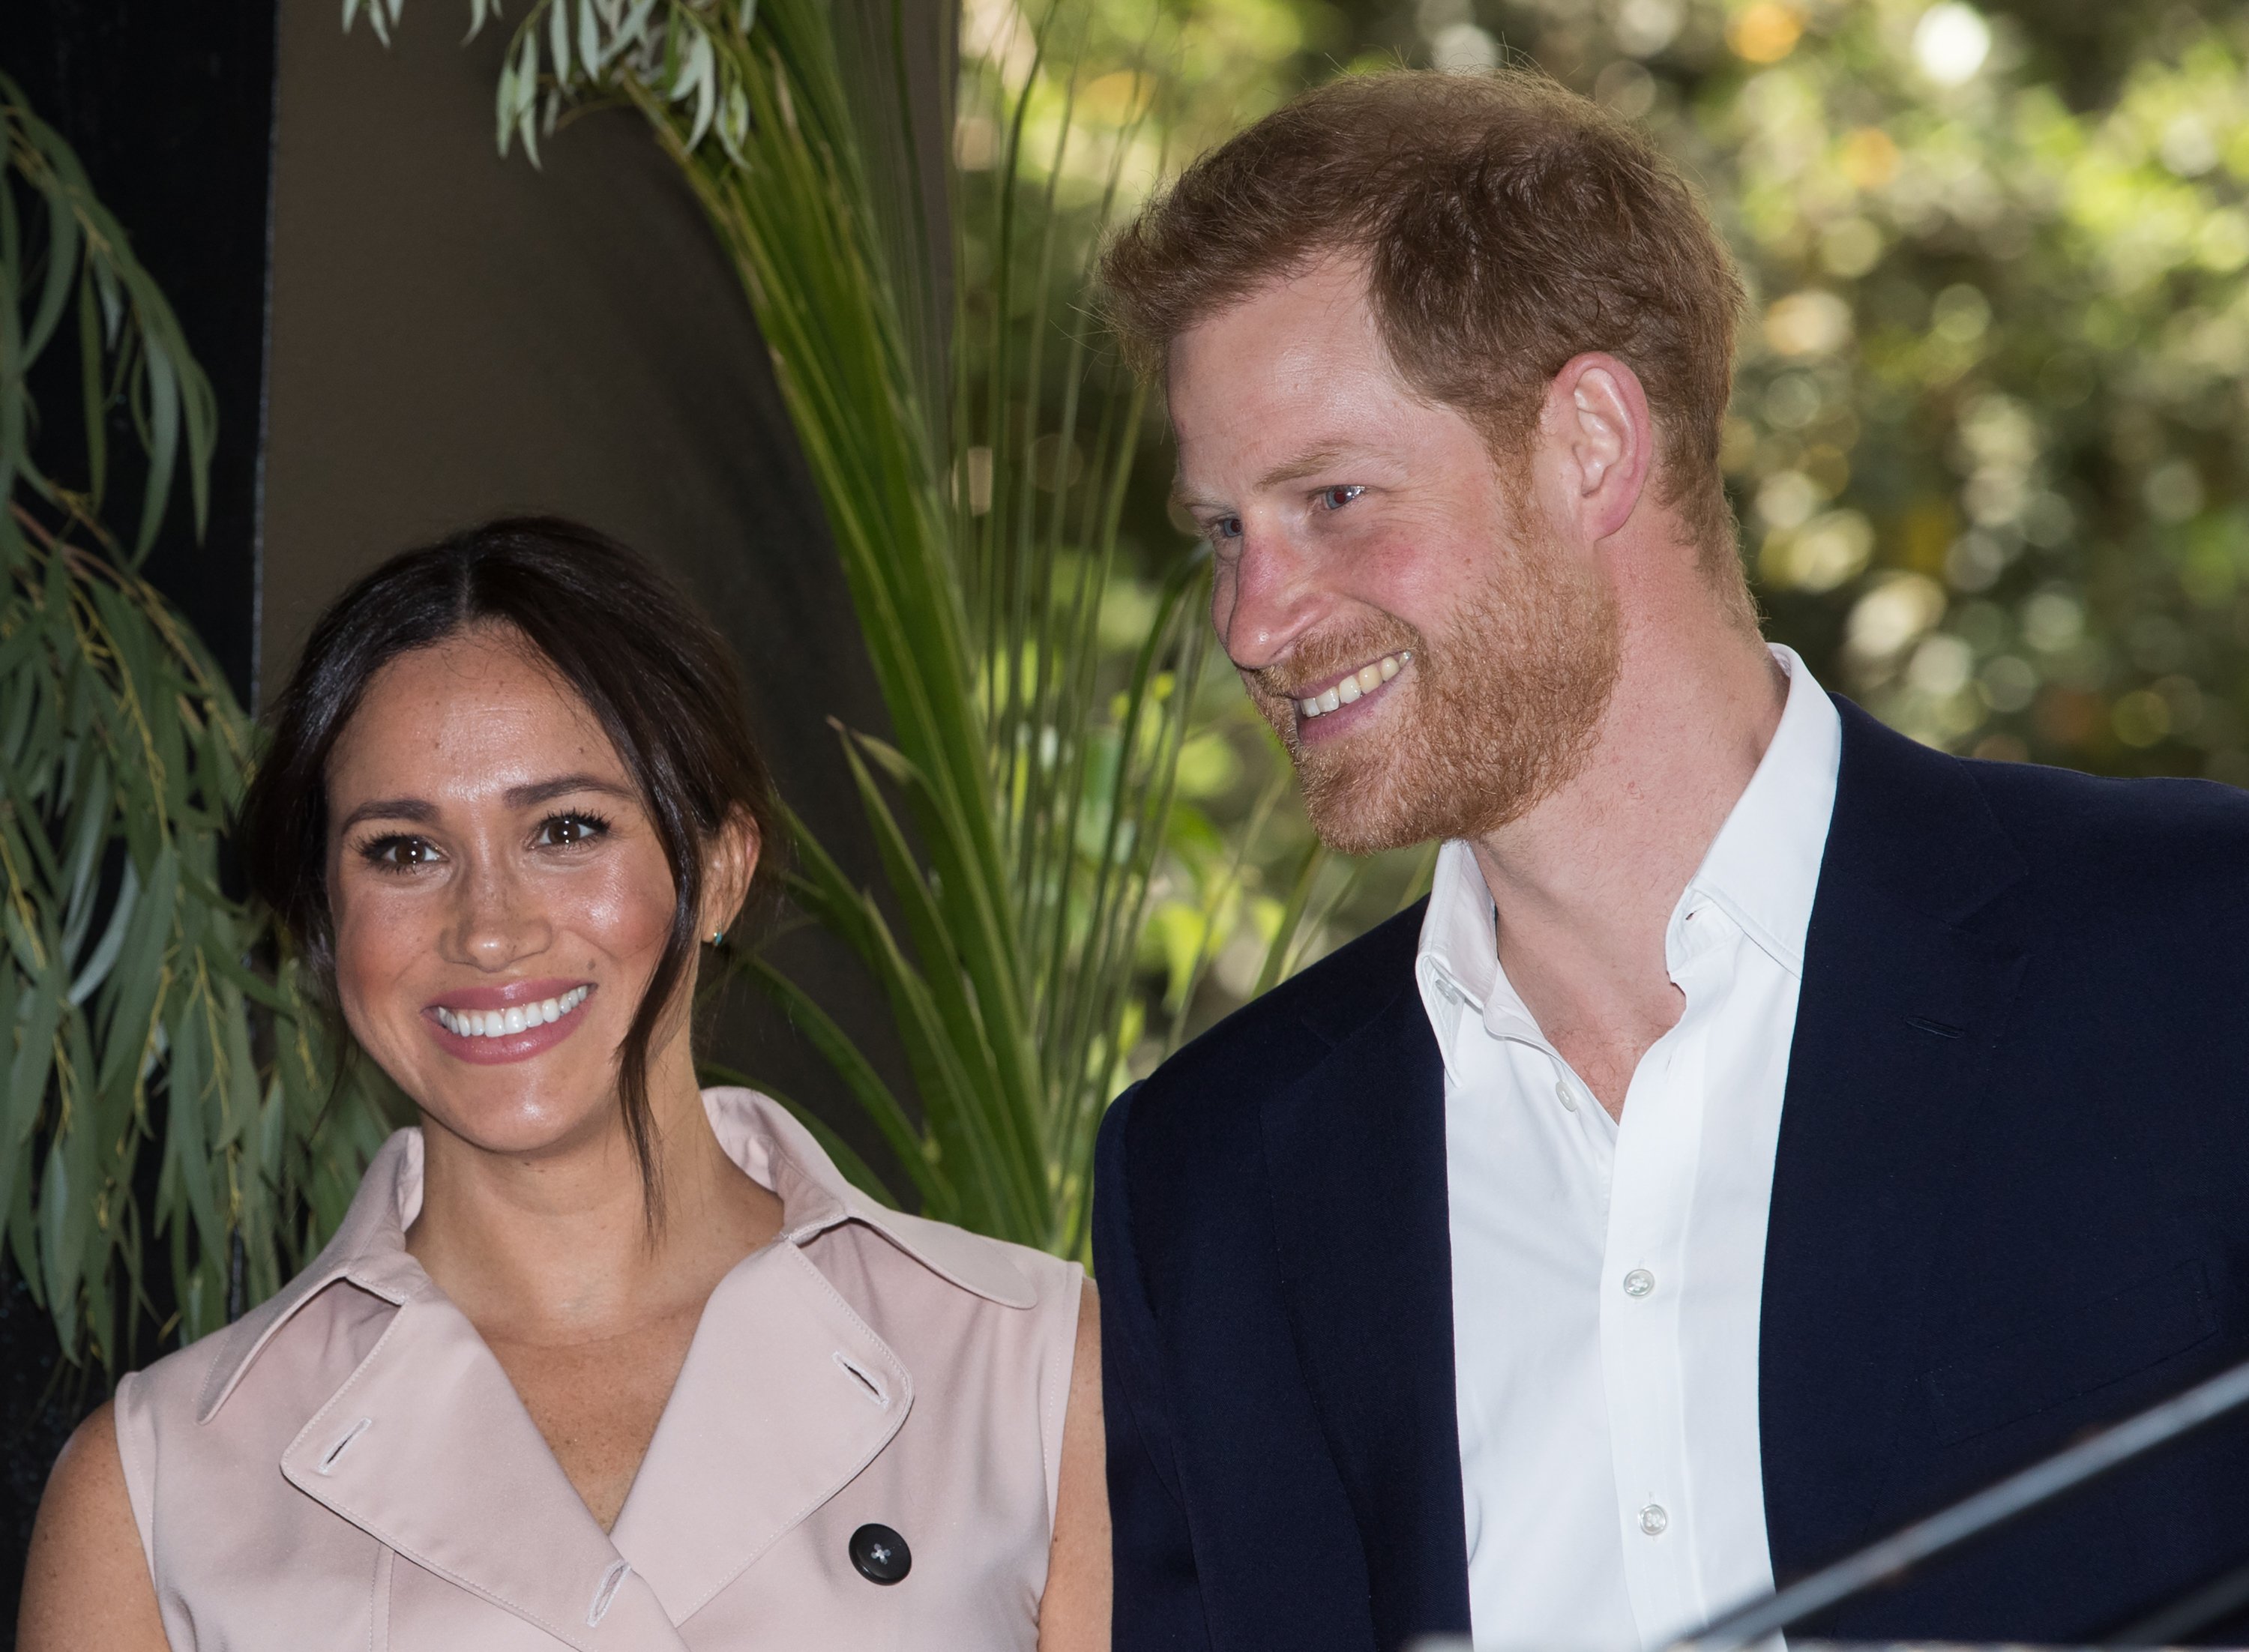 Duchess Meghan and Prince Harry at the British High Commissioner's residence during their royal tour to South Africa on October 2, 2019, in Johannesburg, South Africa. | Source: Getty Images